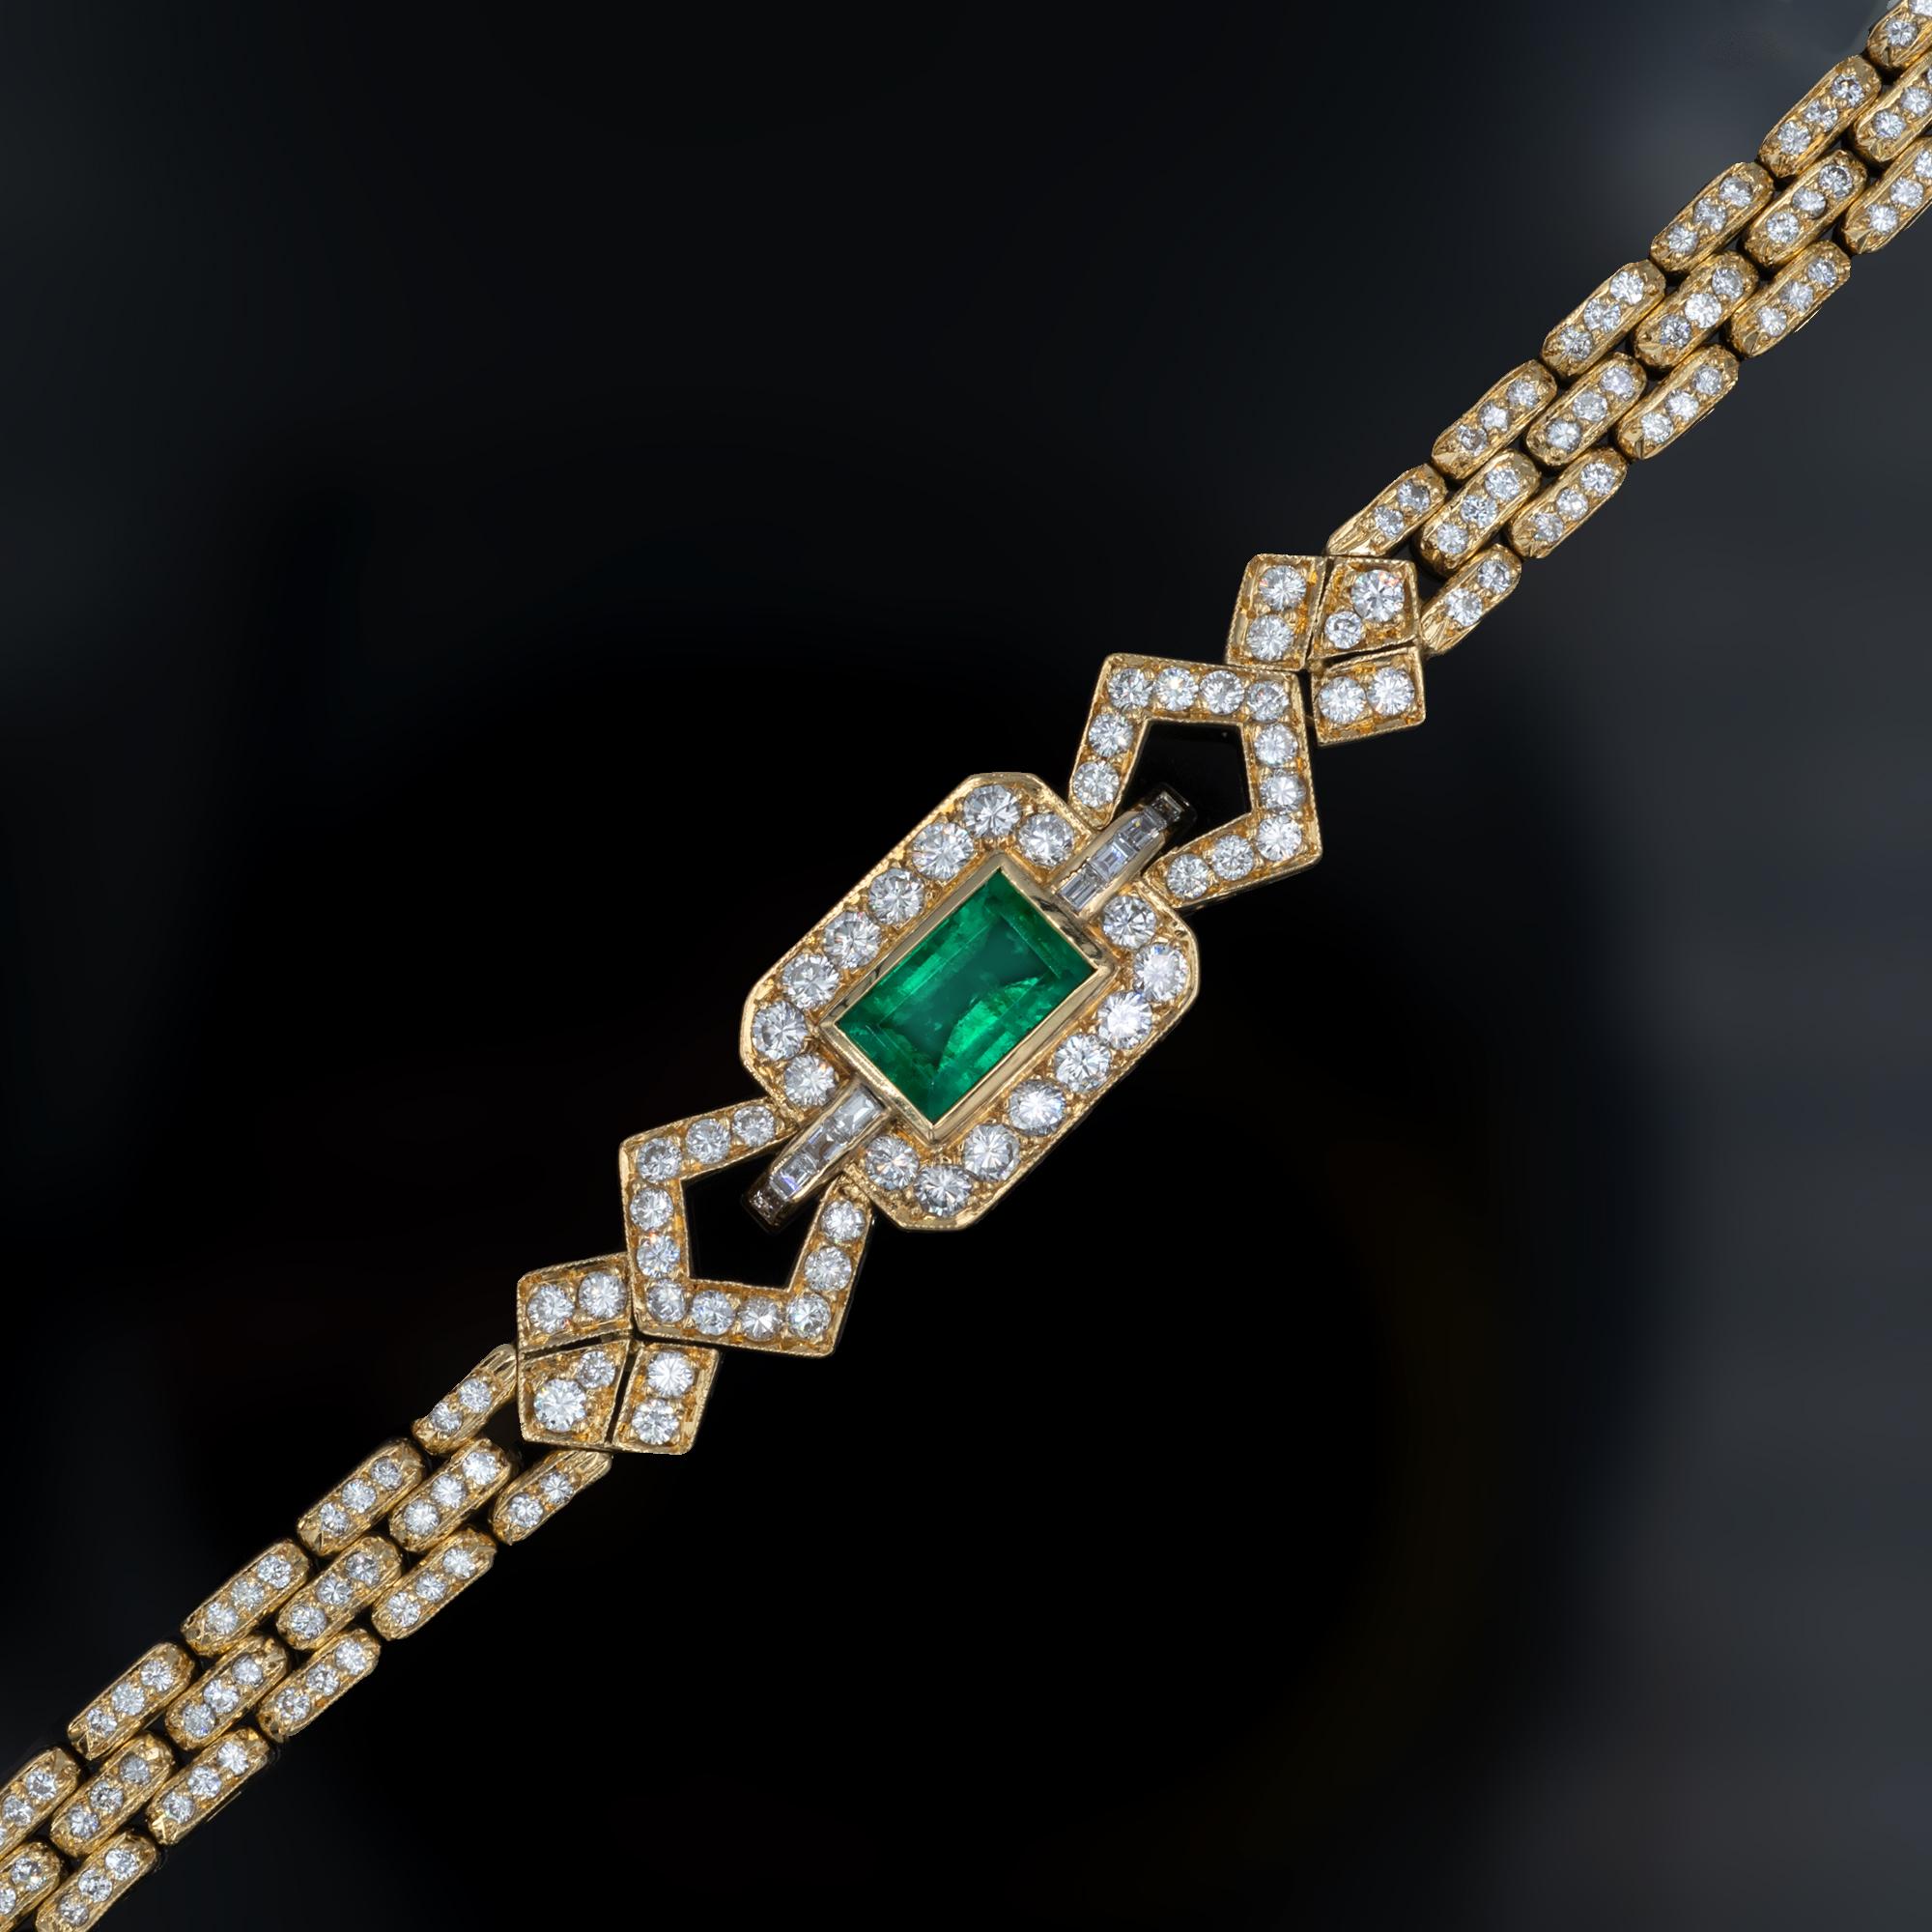 18 karat plain yellow gold bracelet showcasing a beautiful 2.31 carat emerald displaying both liveliness and a saturated green colour. This link bracelet is fully set with high quality diamonds white diamonds  F-G / VVS-VS brilliant cut and